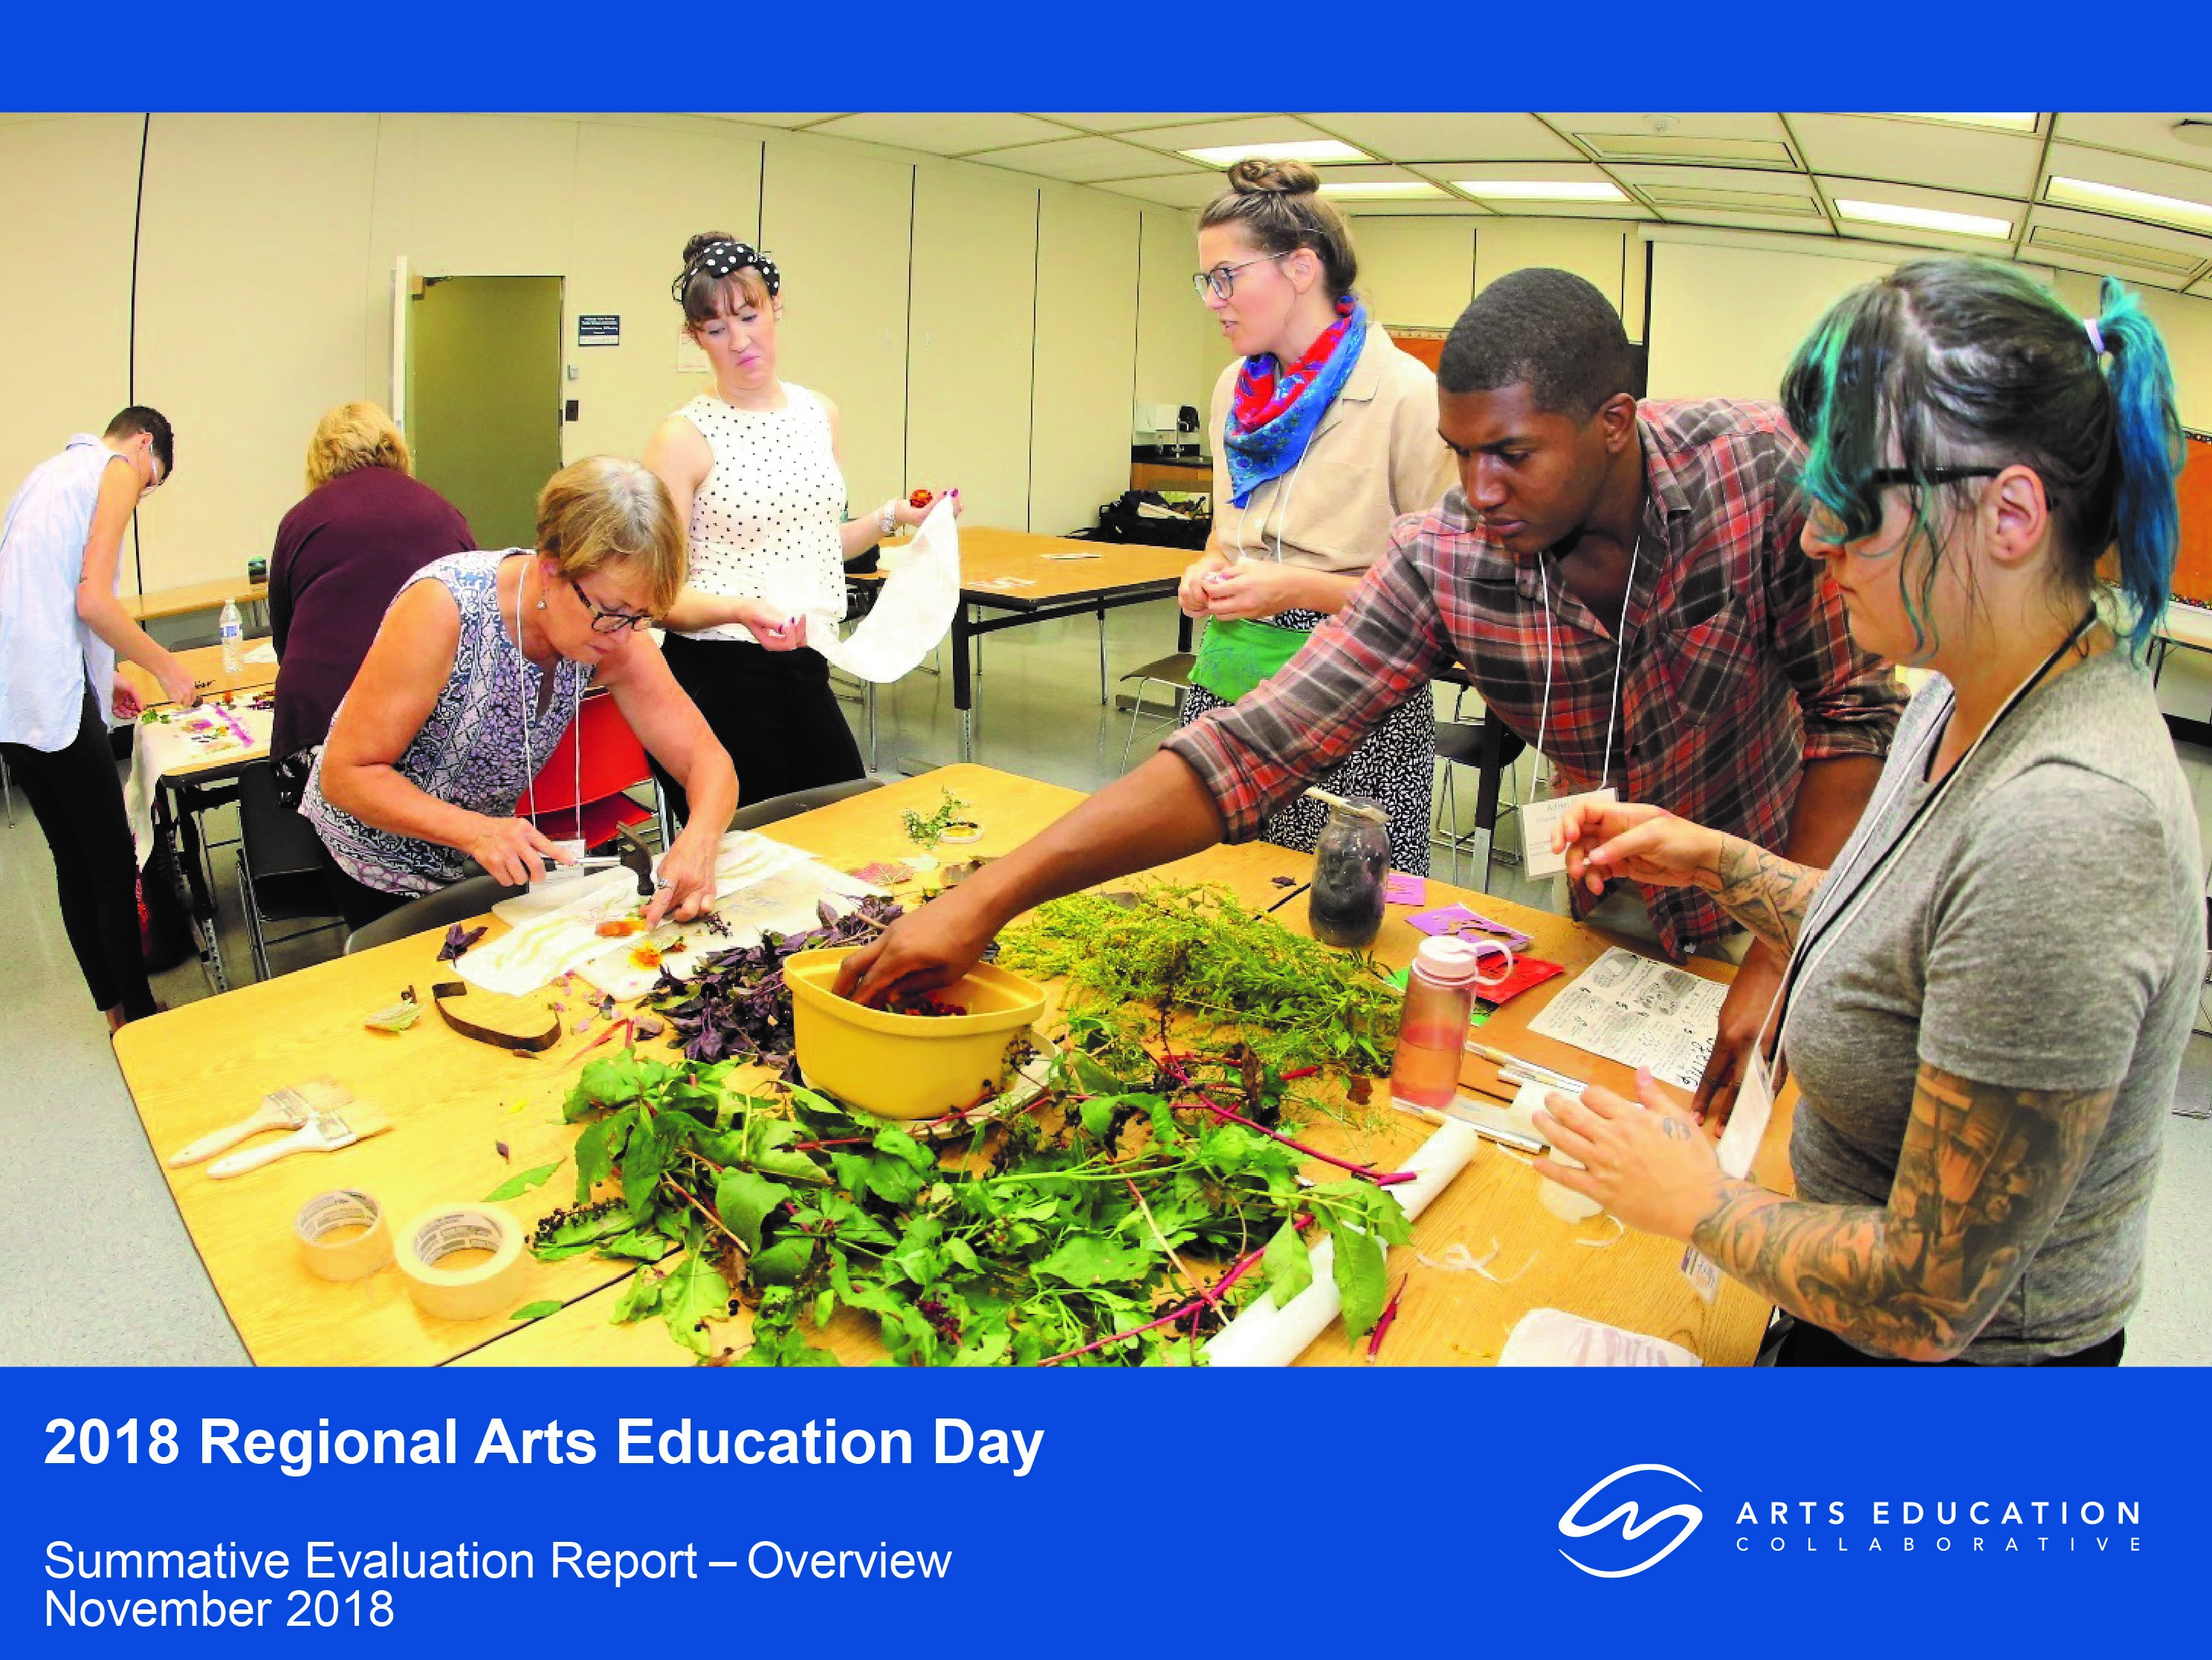 Cover of Regional Arts Education Day 2018 evaluation report showing educators making plant dyes.